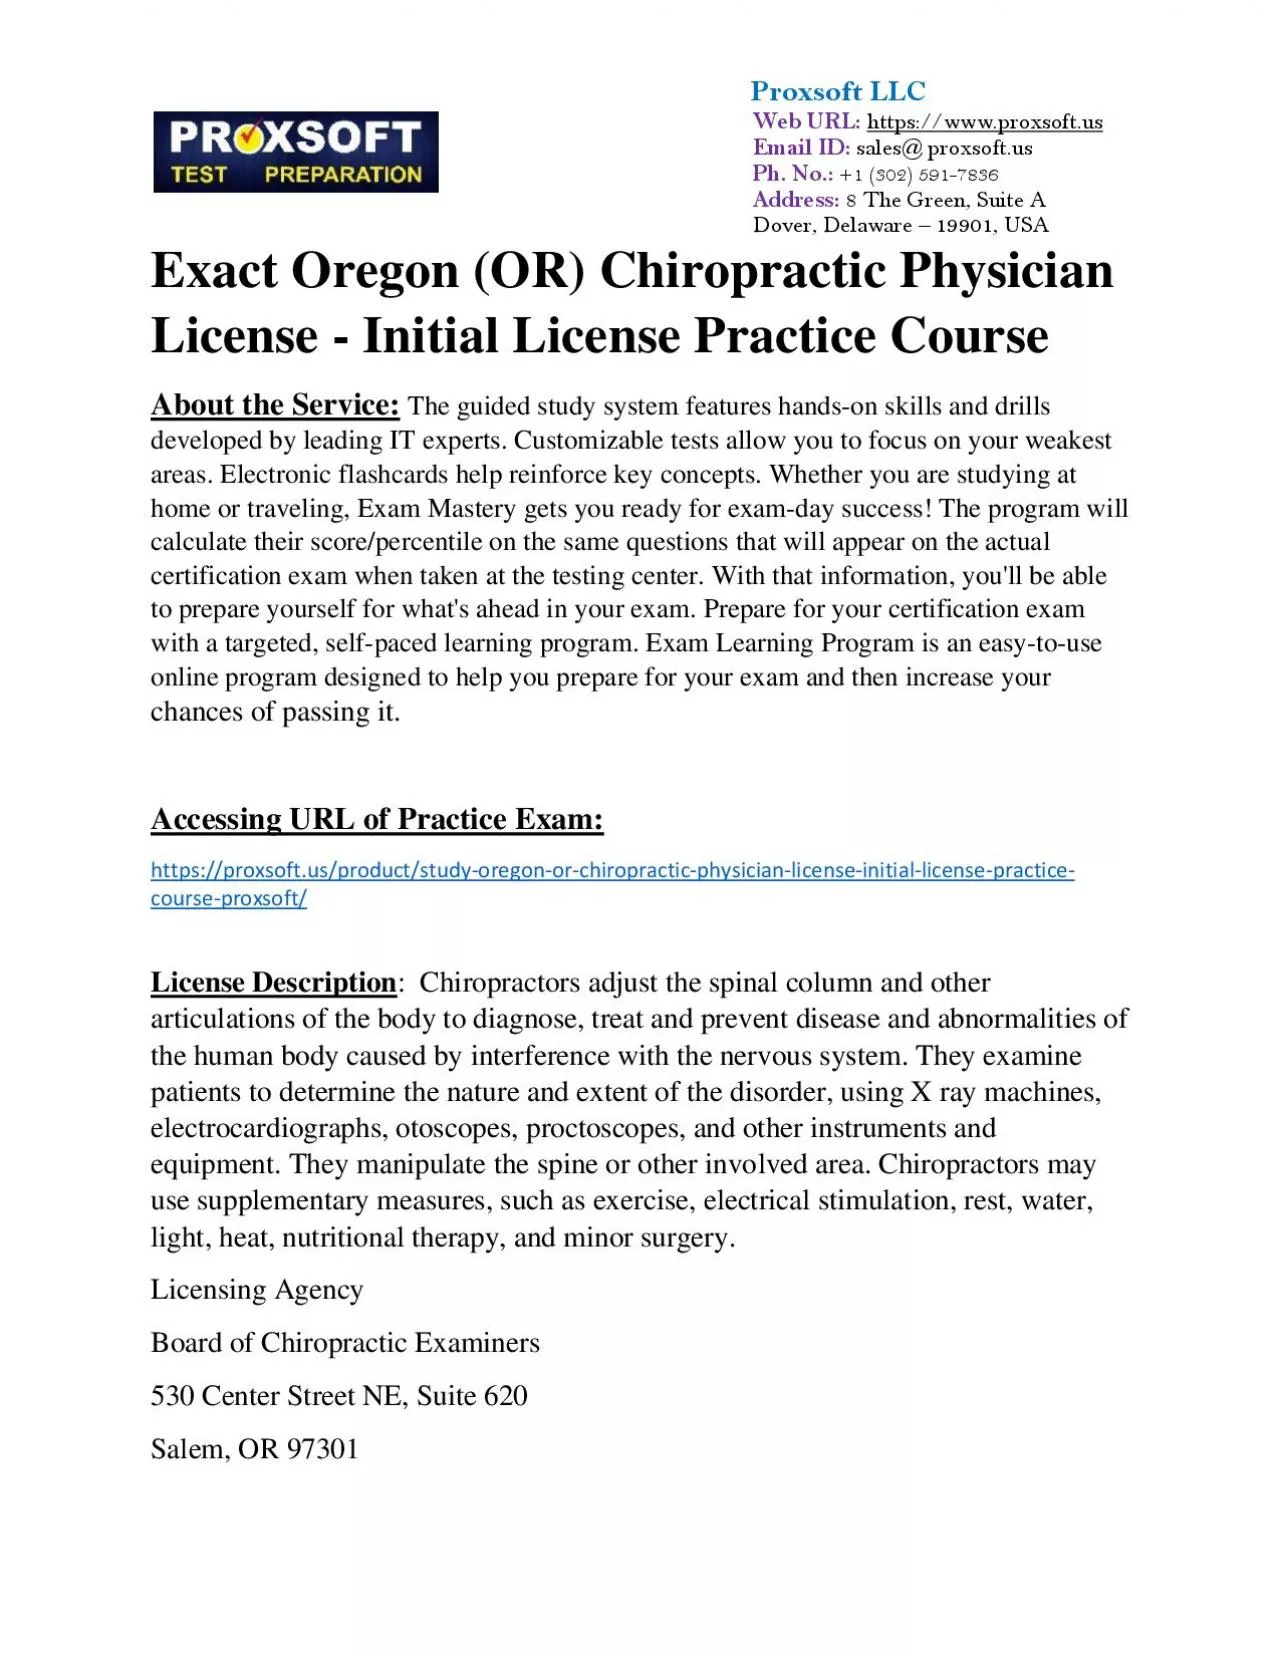 Exact Oregon (OR) Chiropractic Physician License - Initial License Practice Course